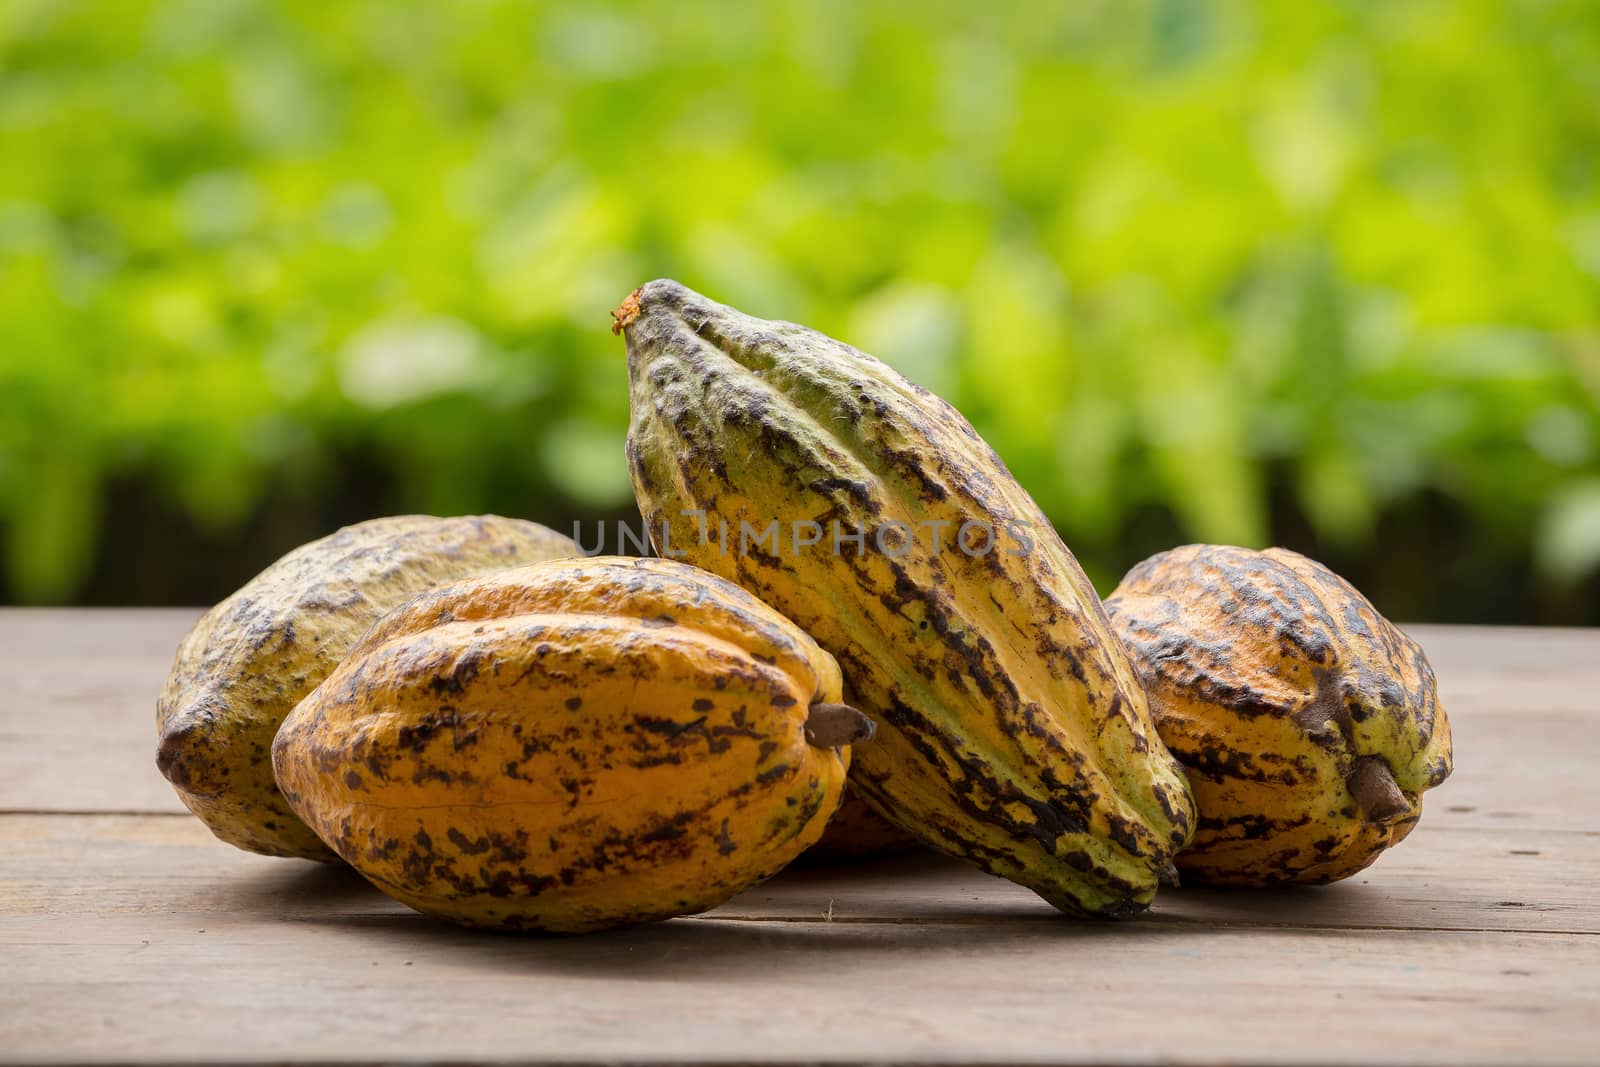 Raw Cocoa beans and cocoa pod on a wooden surface.